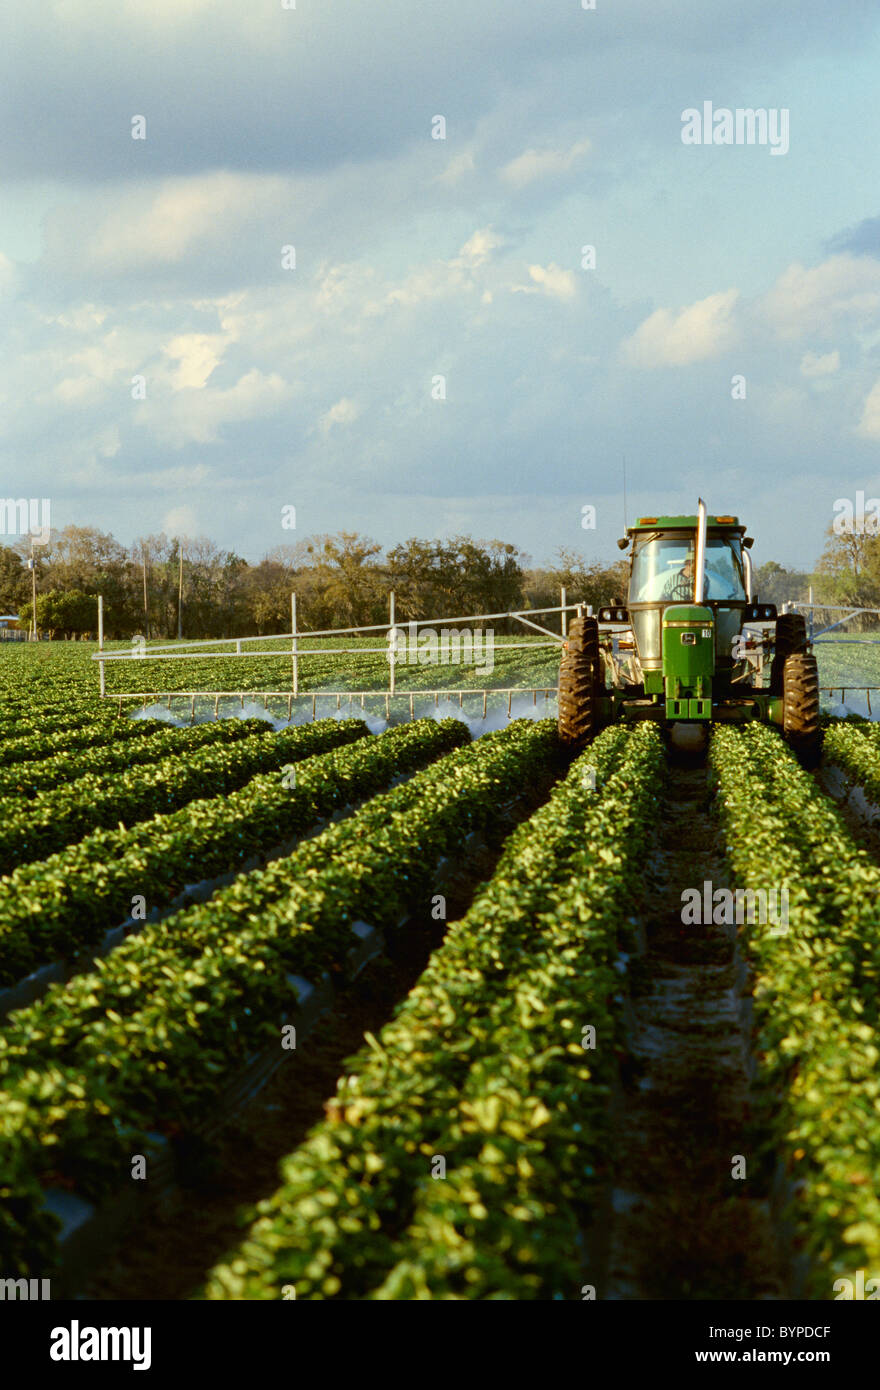 Agriculture - Chemical application, applying fungicide and insecticide to strawberry plants / Plant City, Florida, USA. Stock Photo